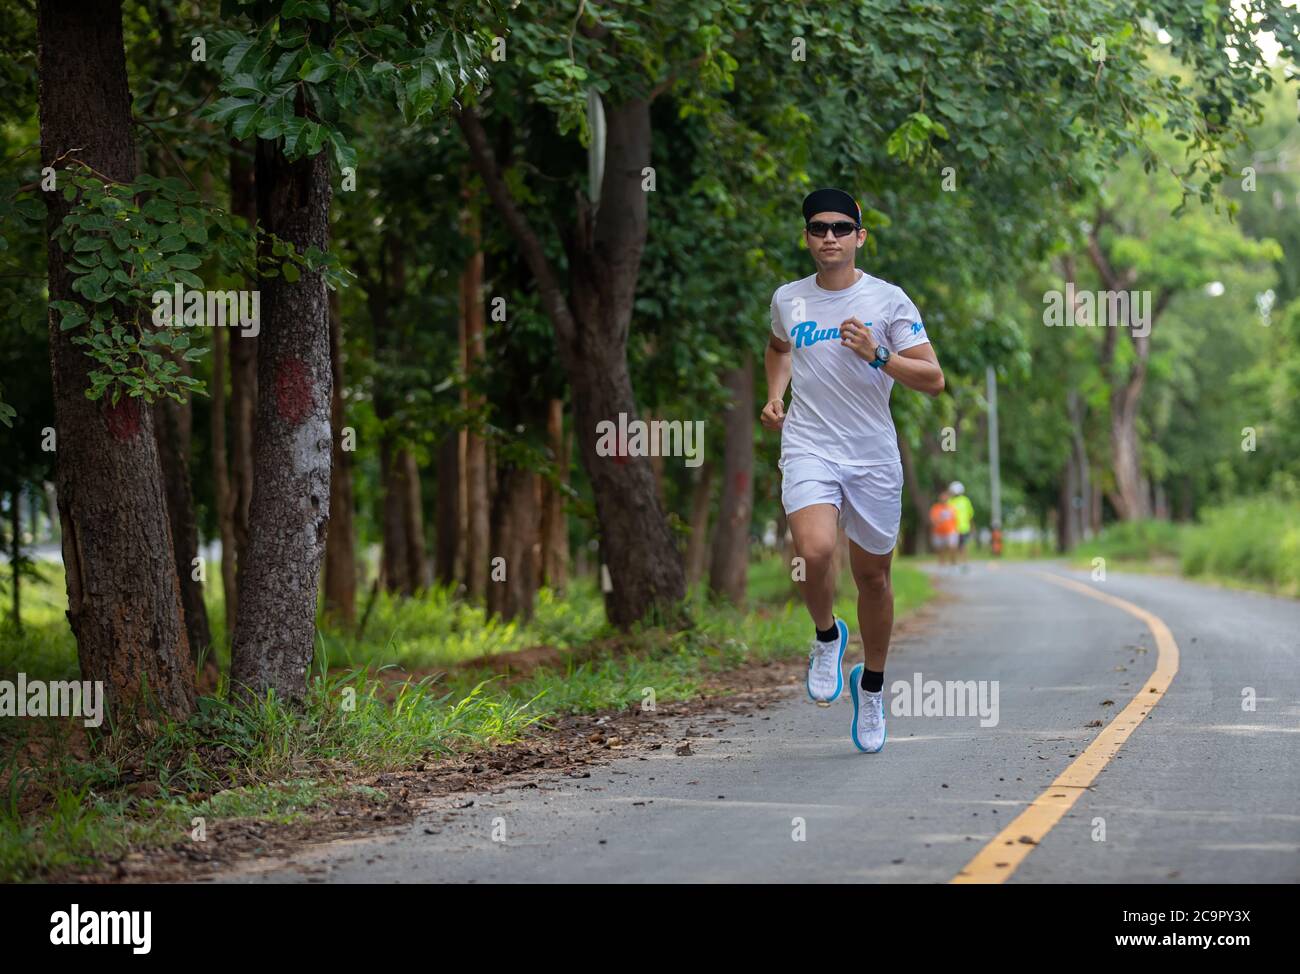 Asian men jogging and running in the park Stock Photo